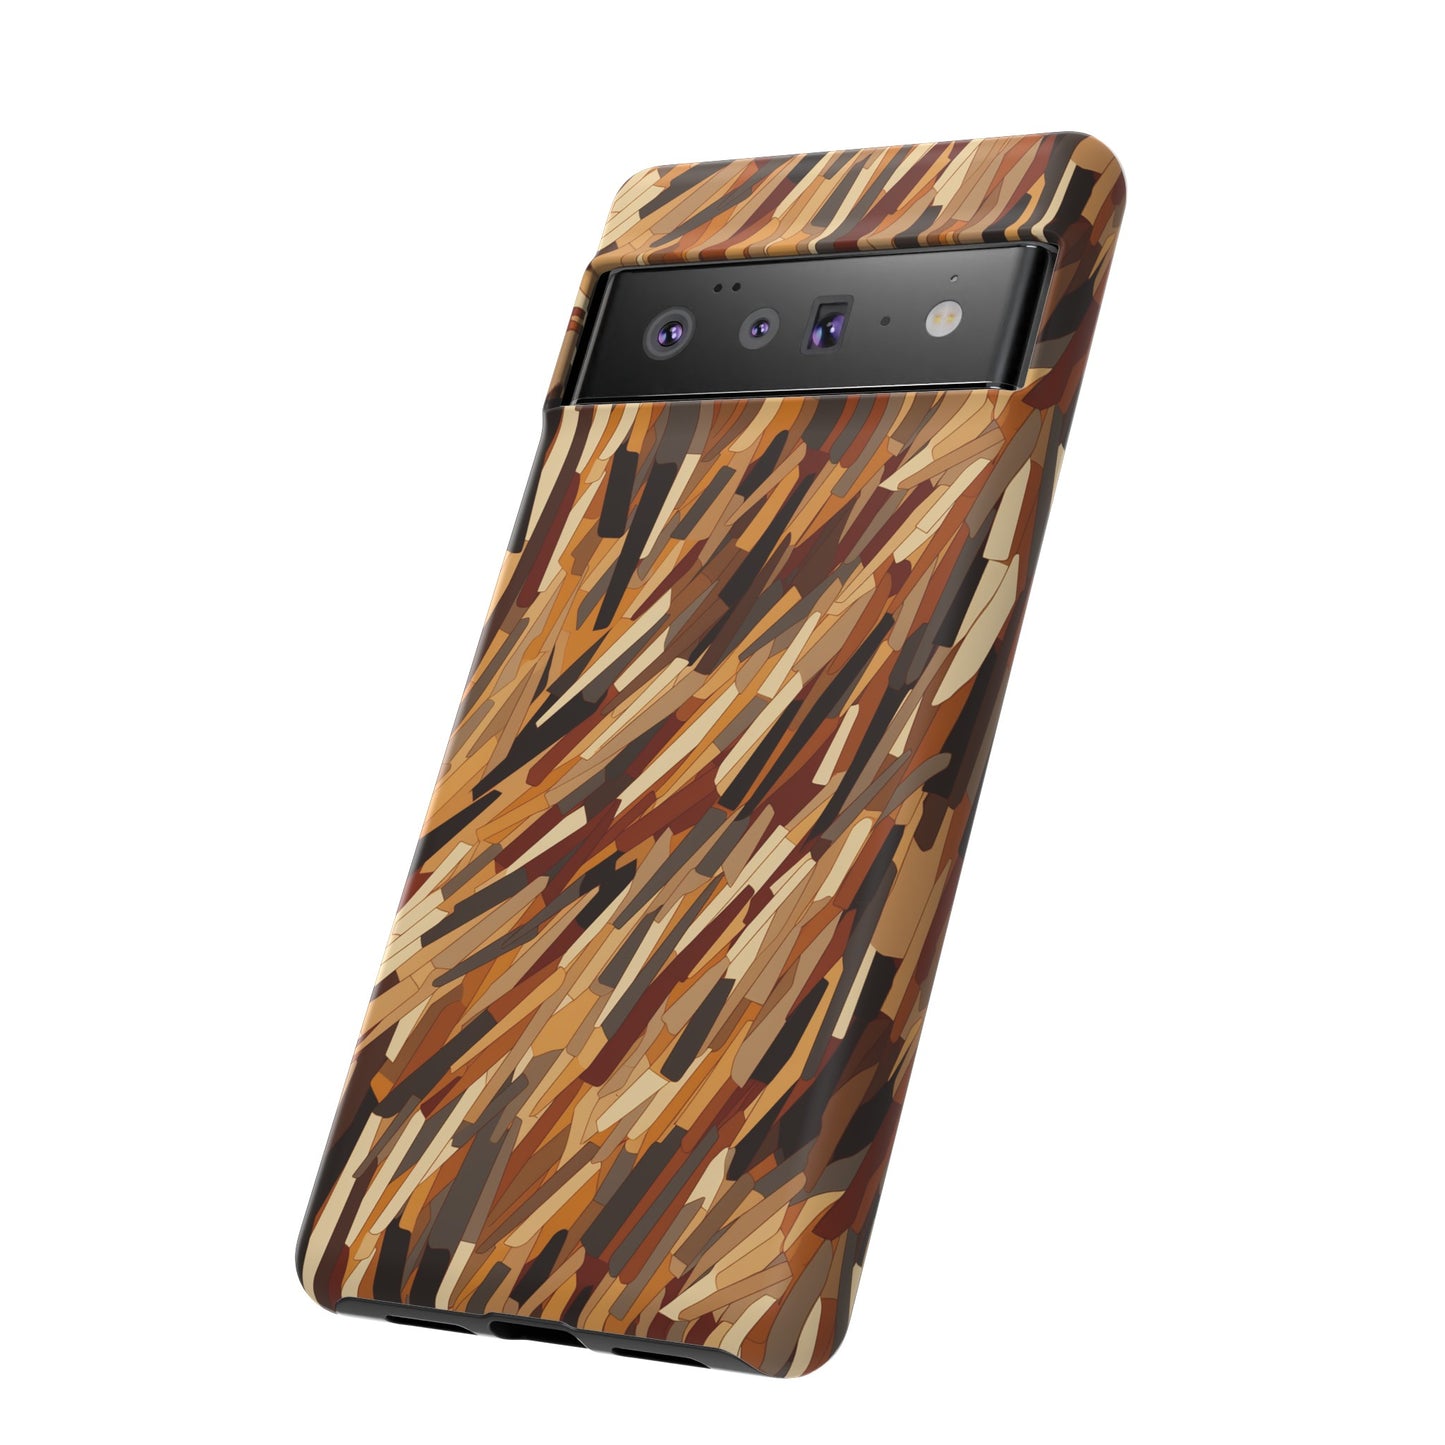 Fragmented Forest: Autumn's Abstract Palette Tough Phone Case